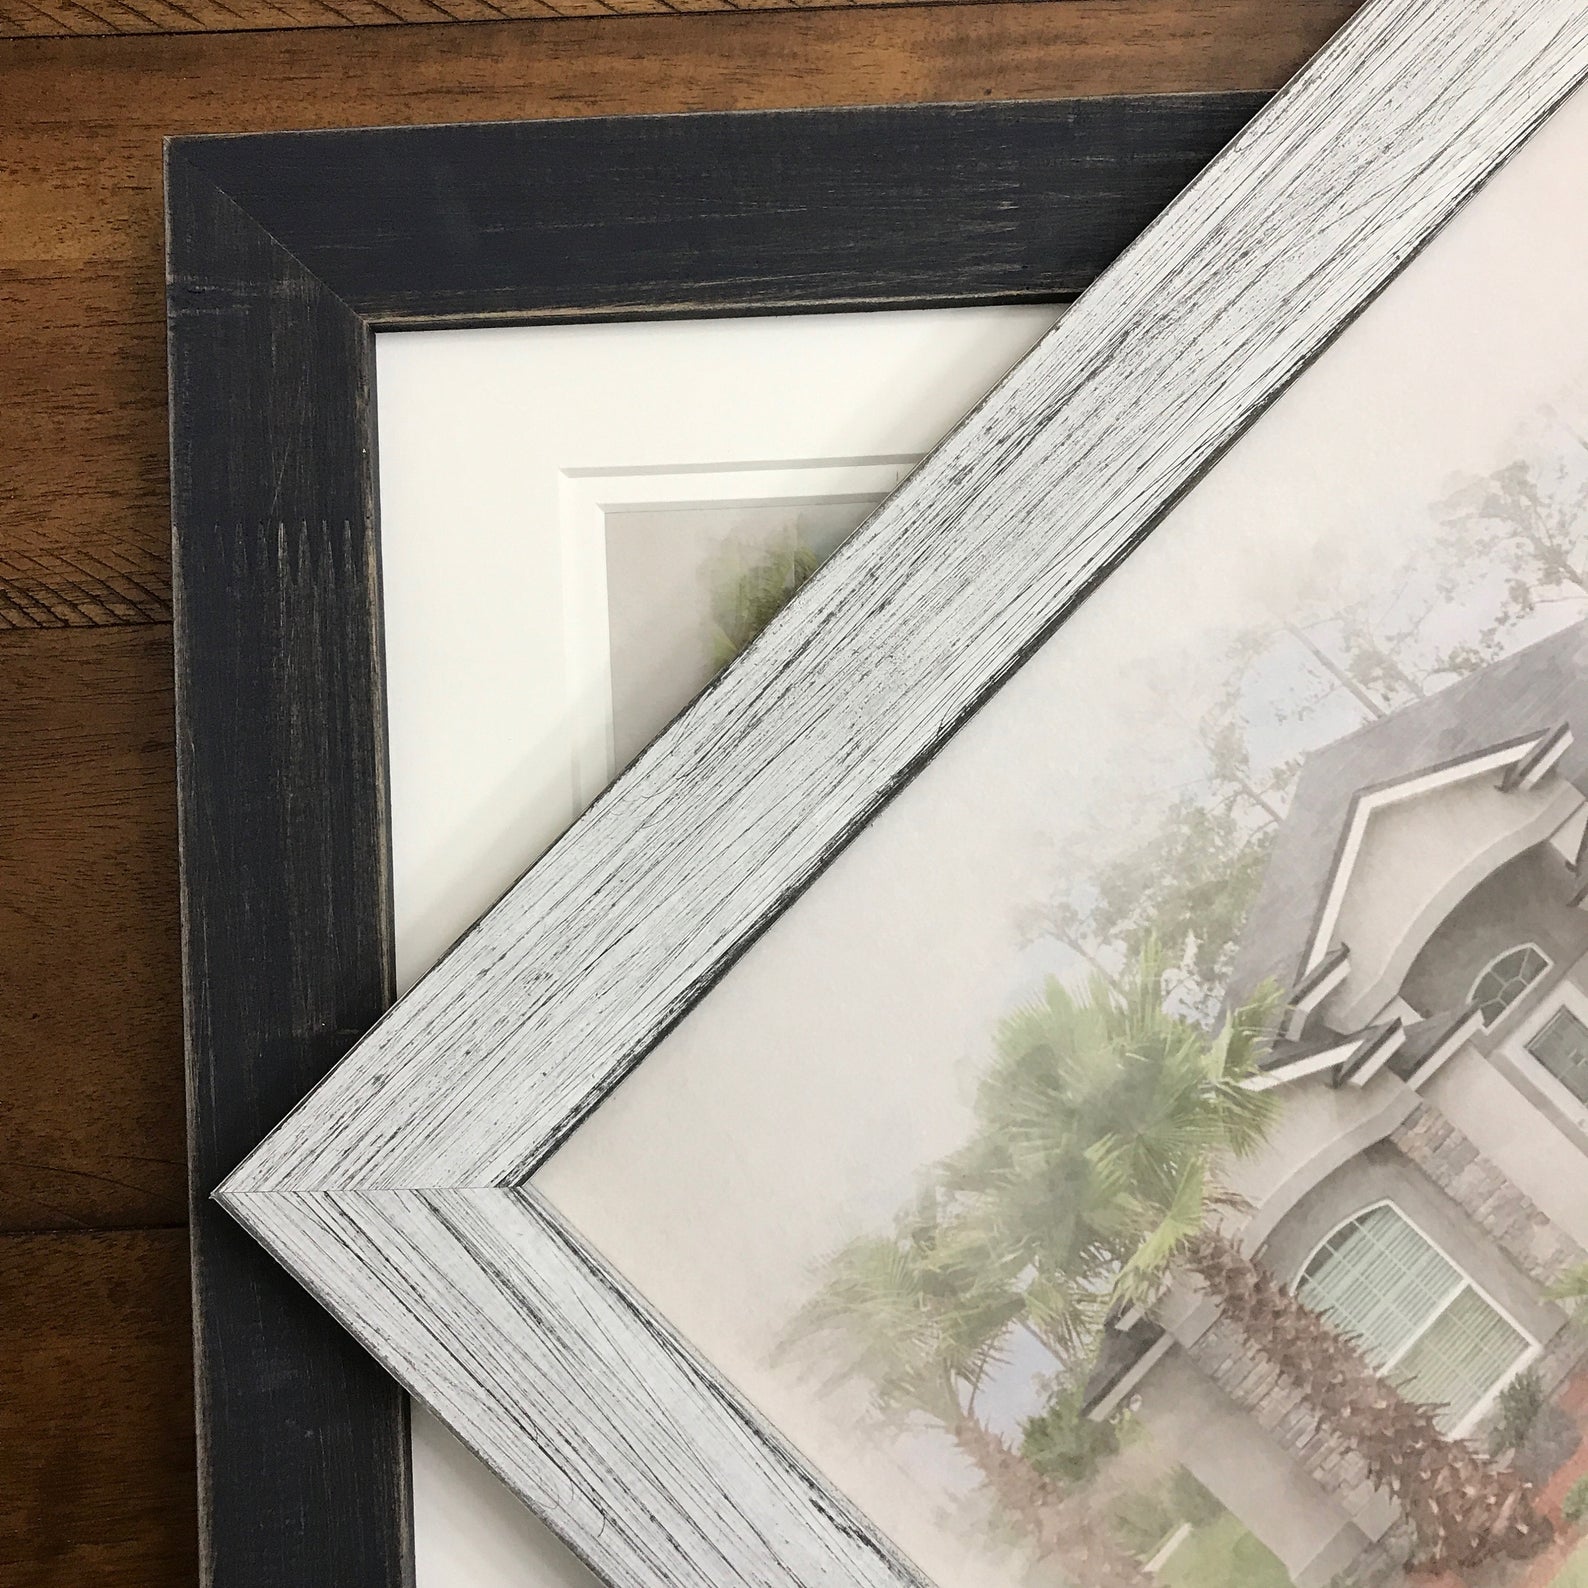 Add a Frame to your Artwork - Kristin Hinsley